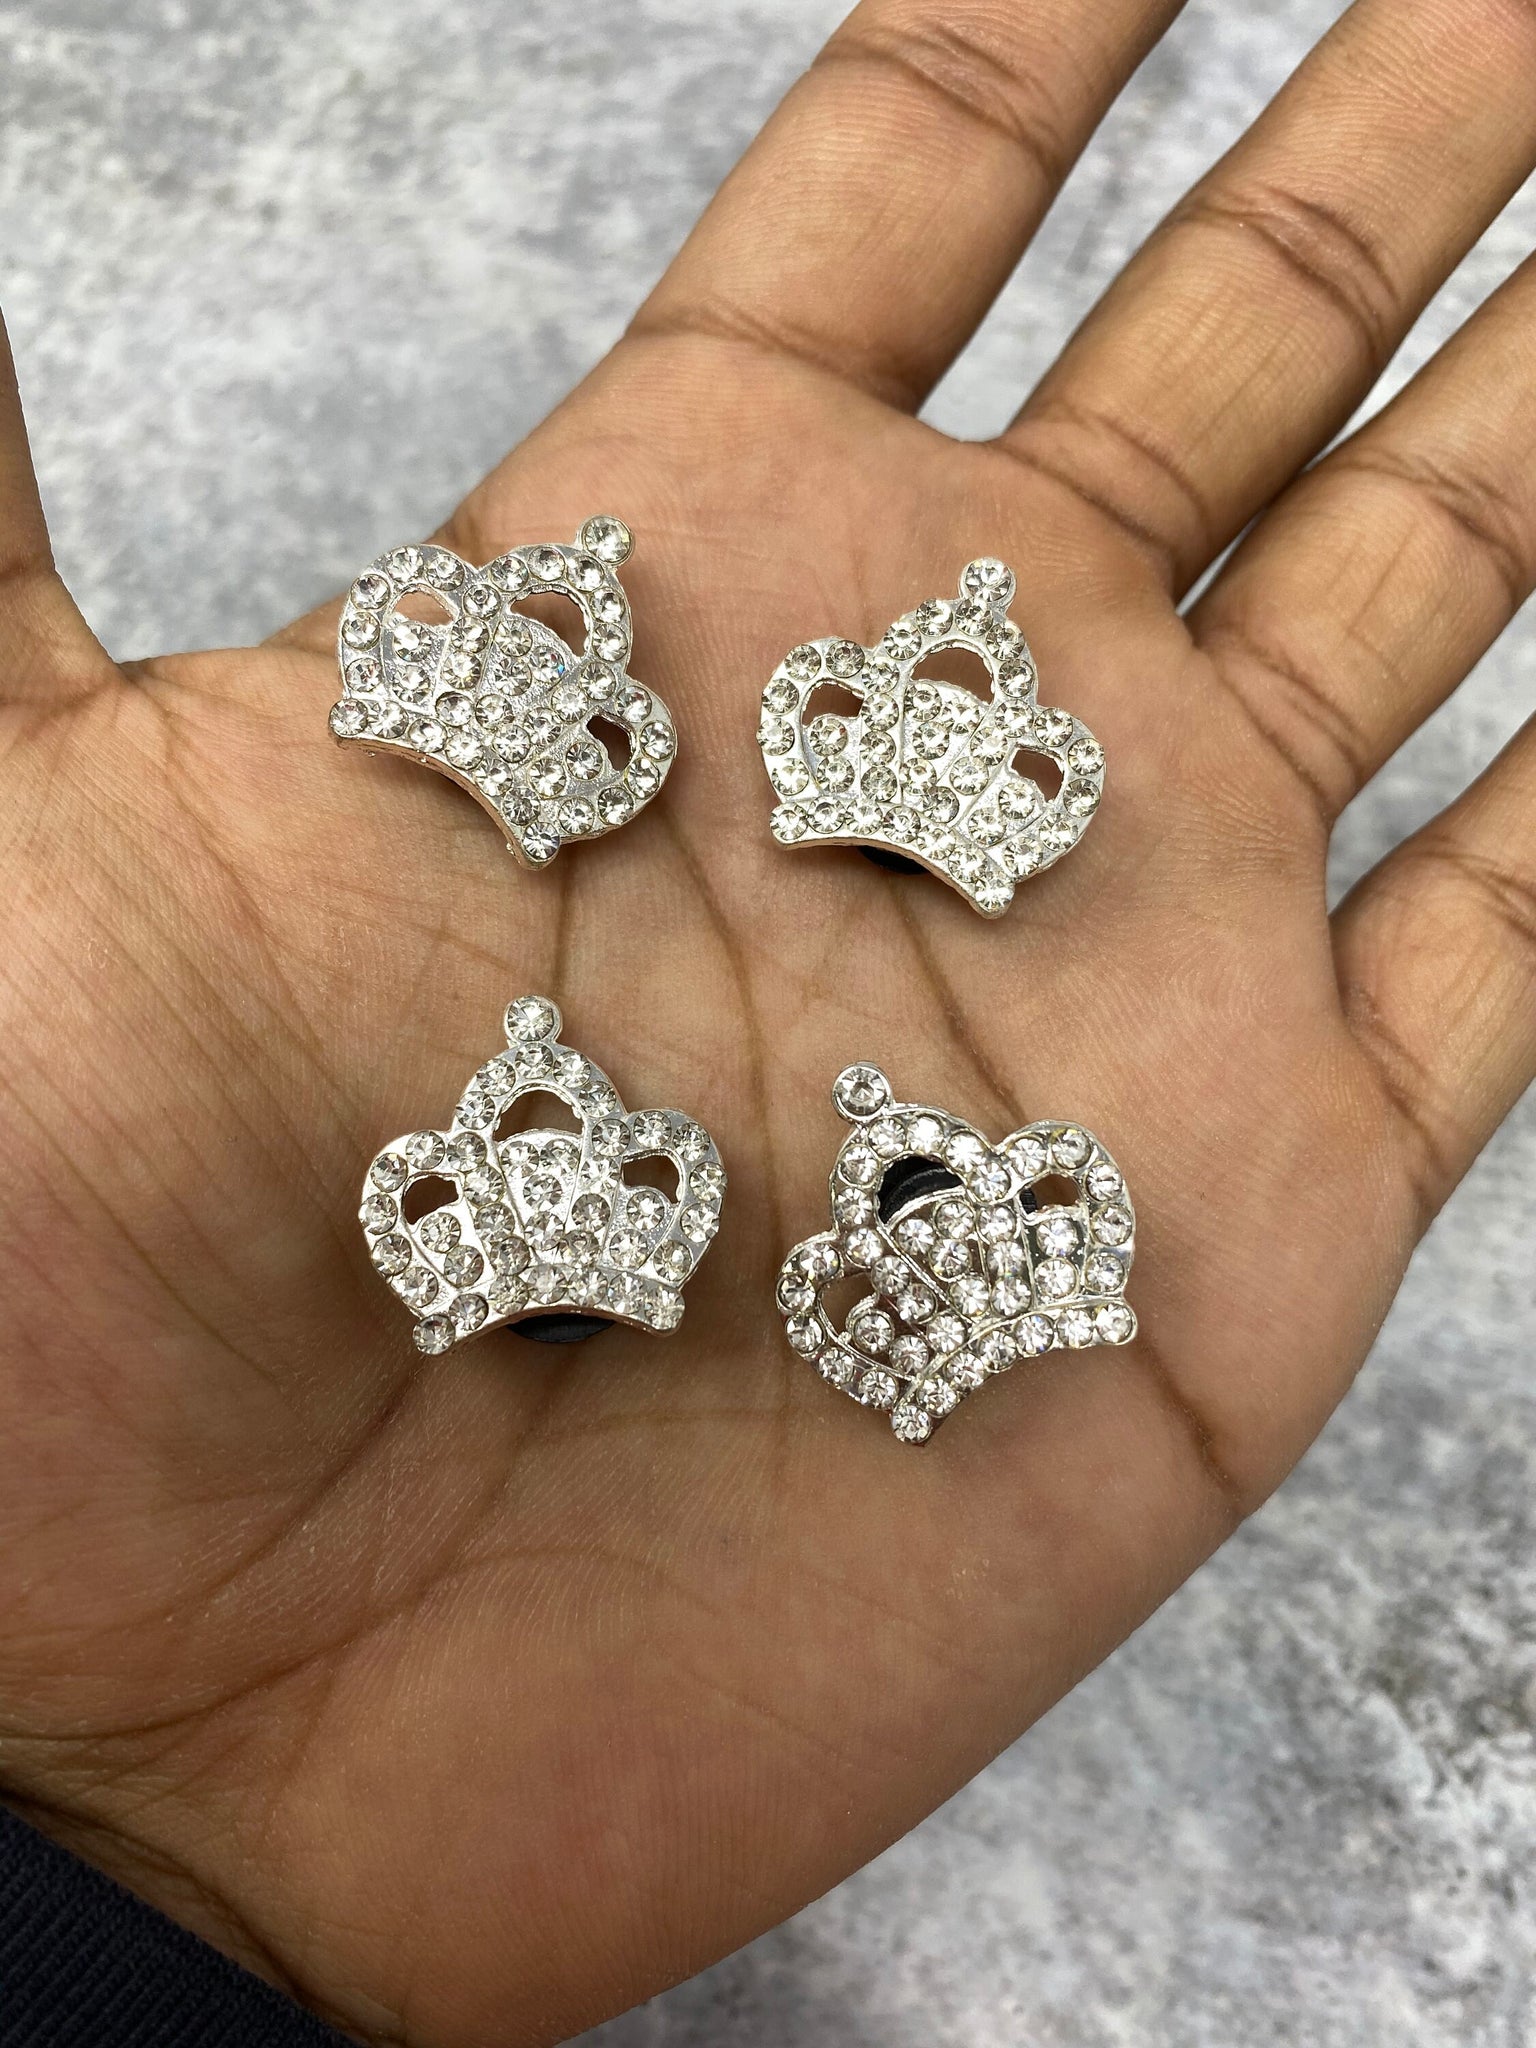 Exclusive "Royal Rhinestone Crown" Girly Charm for Crocs; Symbolic Statement Charms for Clogs; Cute Charm for Shoes and Silicone Bracelets